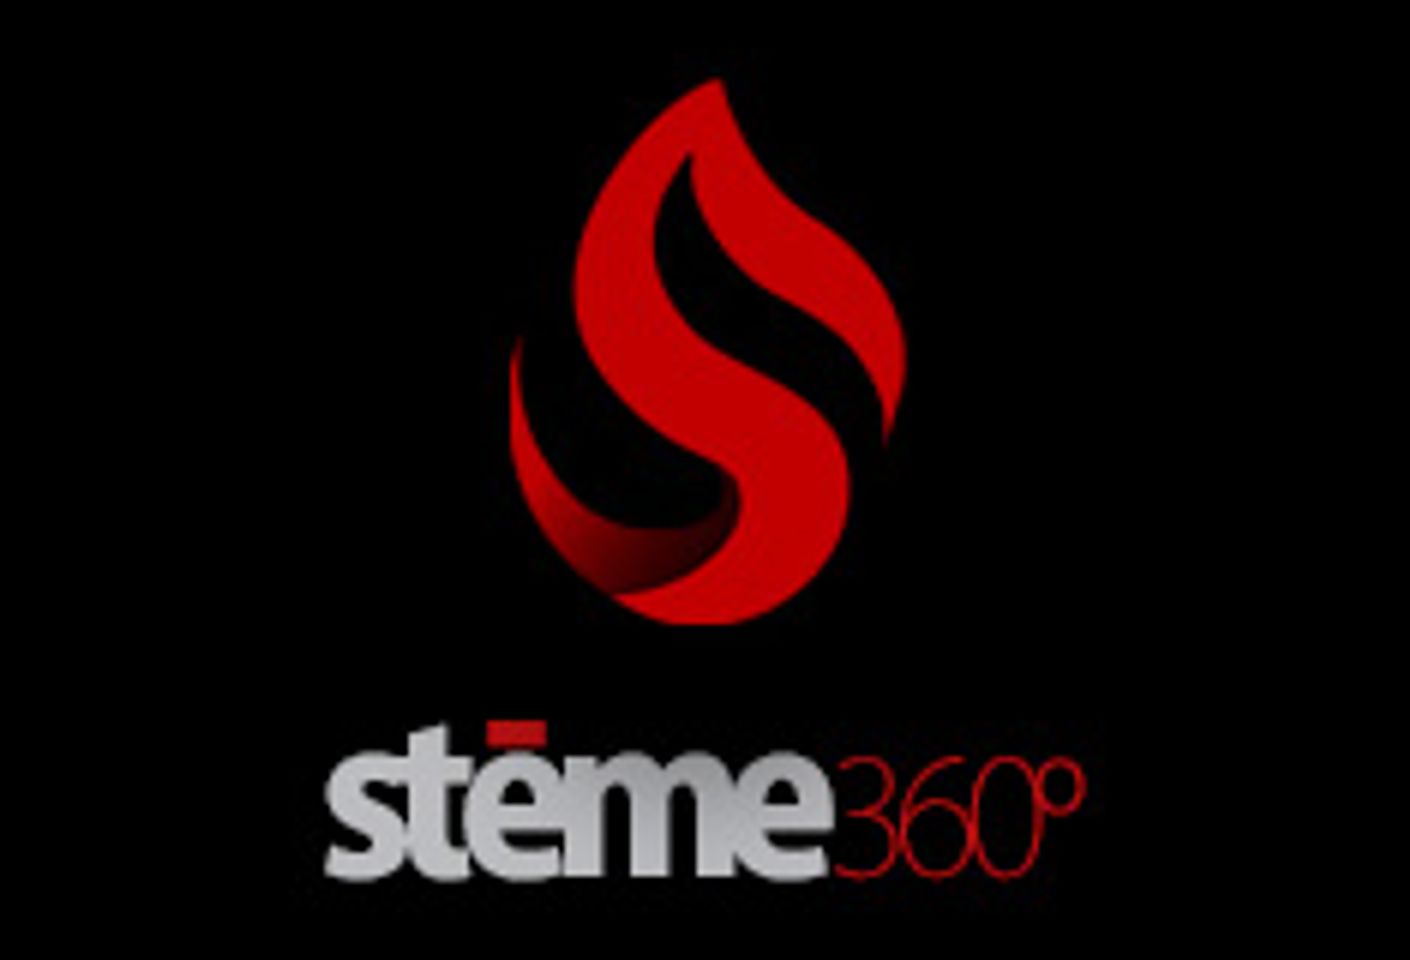 STEME360 Reports Successful Promotion of Brands at ILS